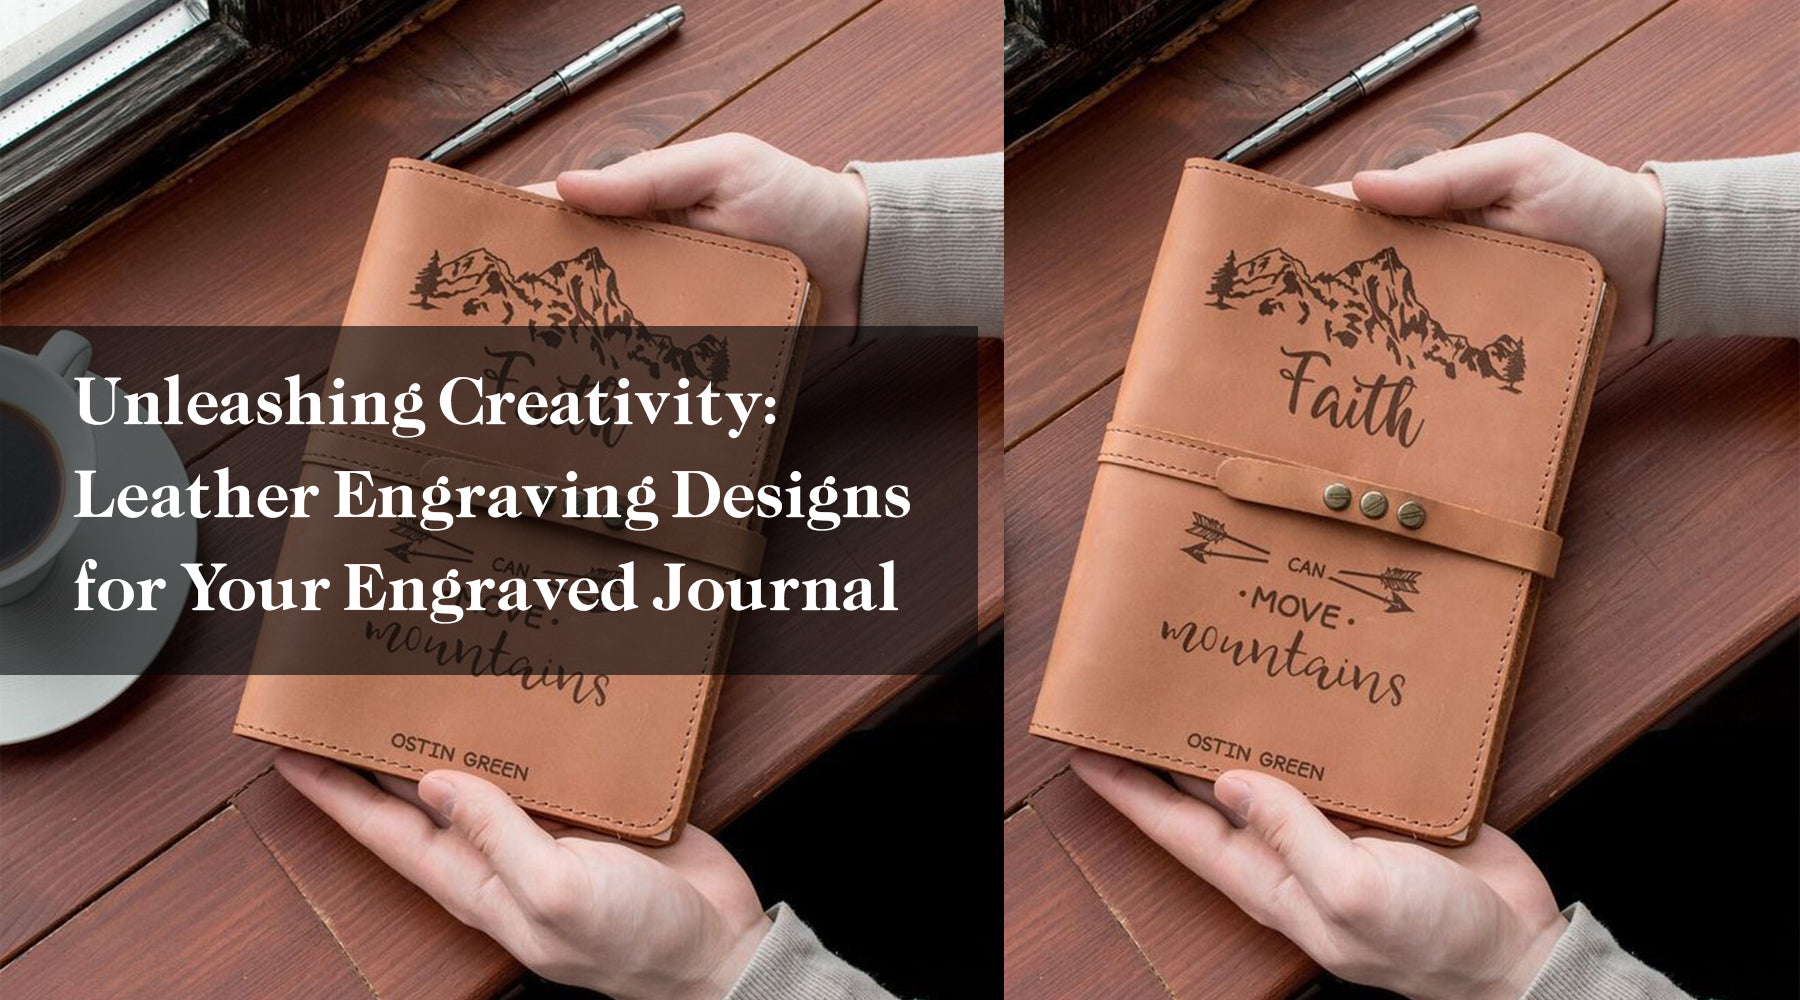 Unleashing Creativity: Leather Engraving Designs for Your Engraved Journal